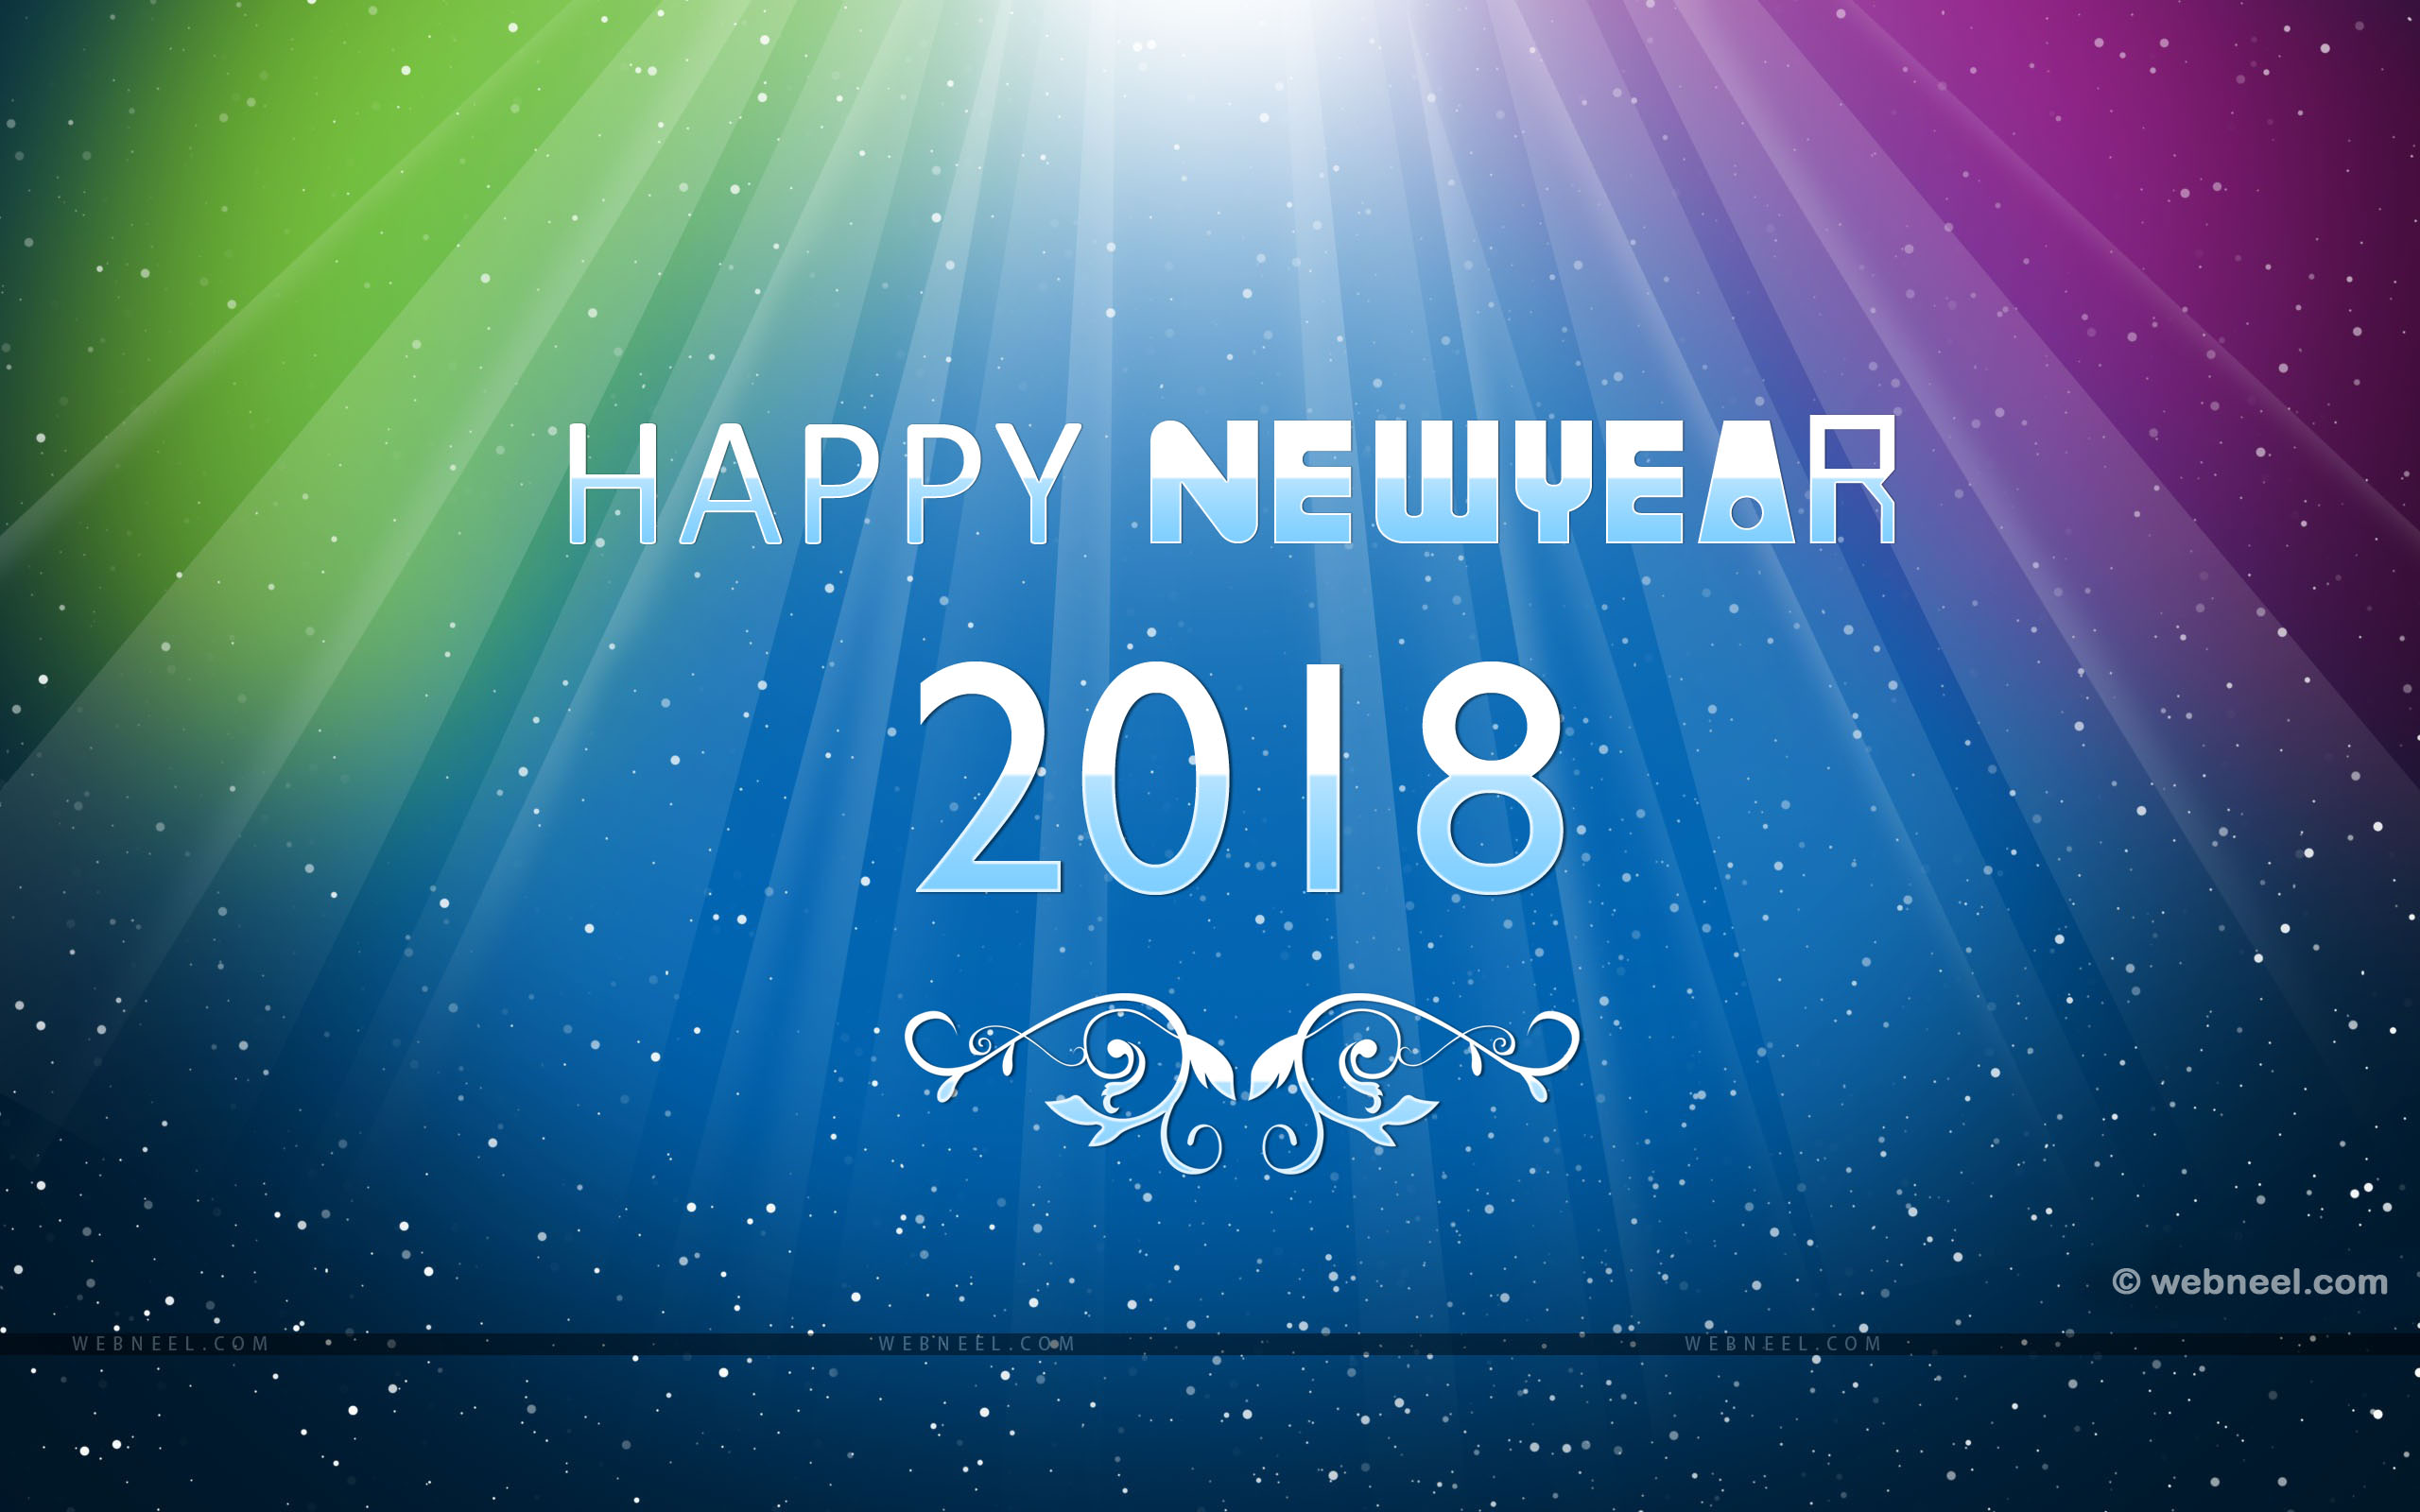 New Year 2018 Wallpaper Hd New Years Wallpapers Happy HD Wallpapers Download Free Map Images Wallpaper [wallpaper684.blogspot.com]